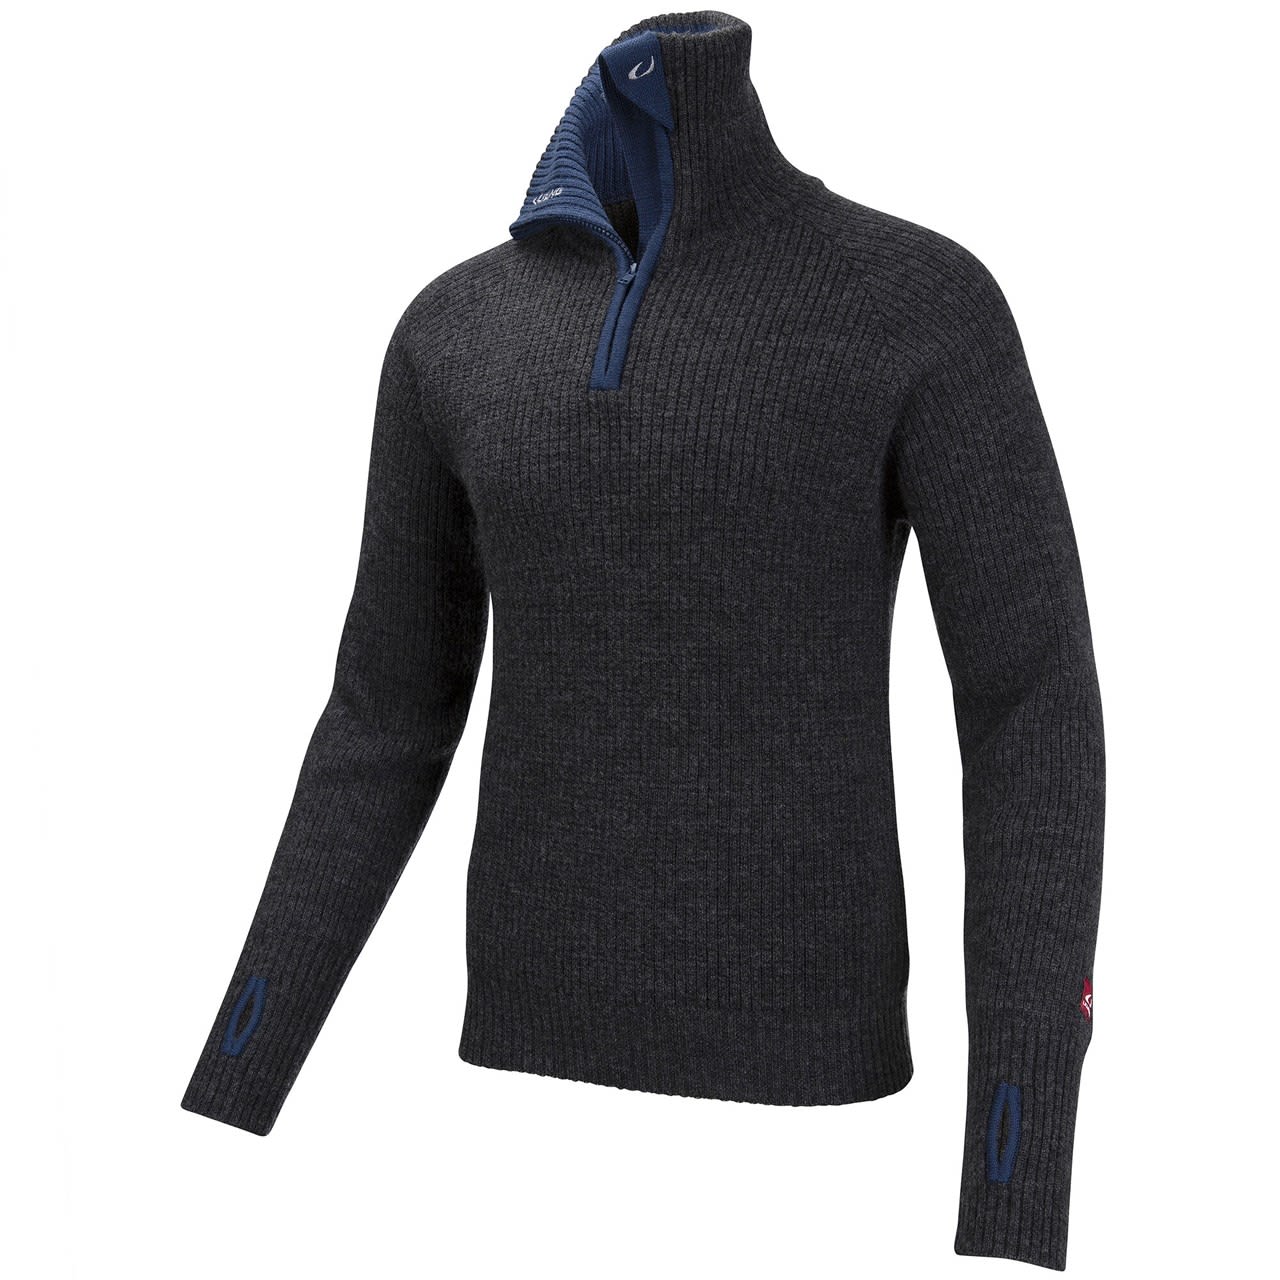 Sekretær Mania Sober Buy Ulvang Rav Sweater With Zip from Outnorth